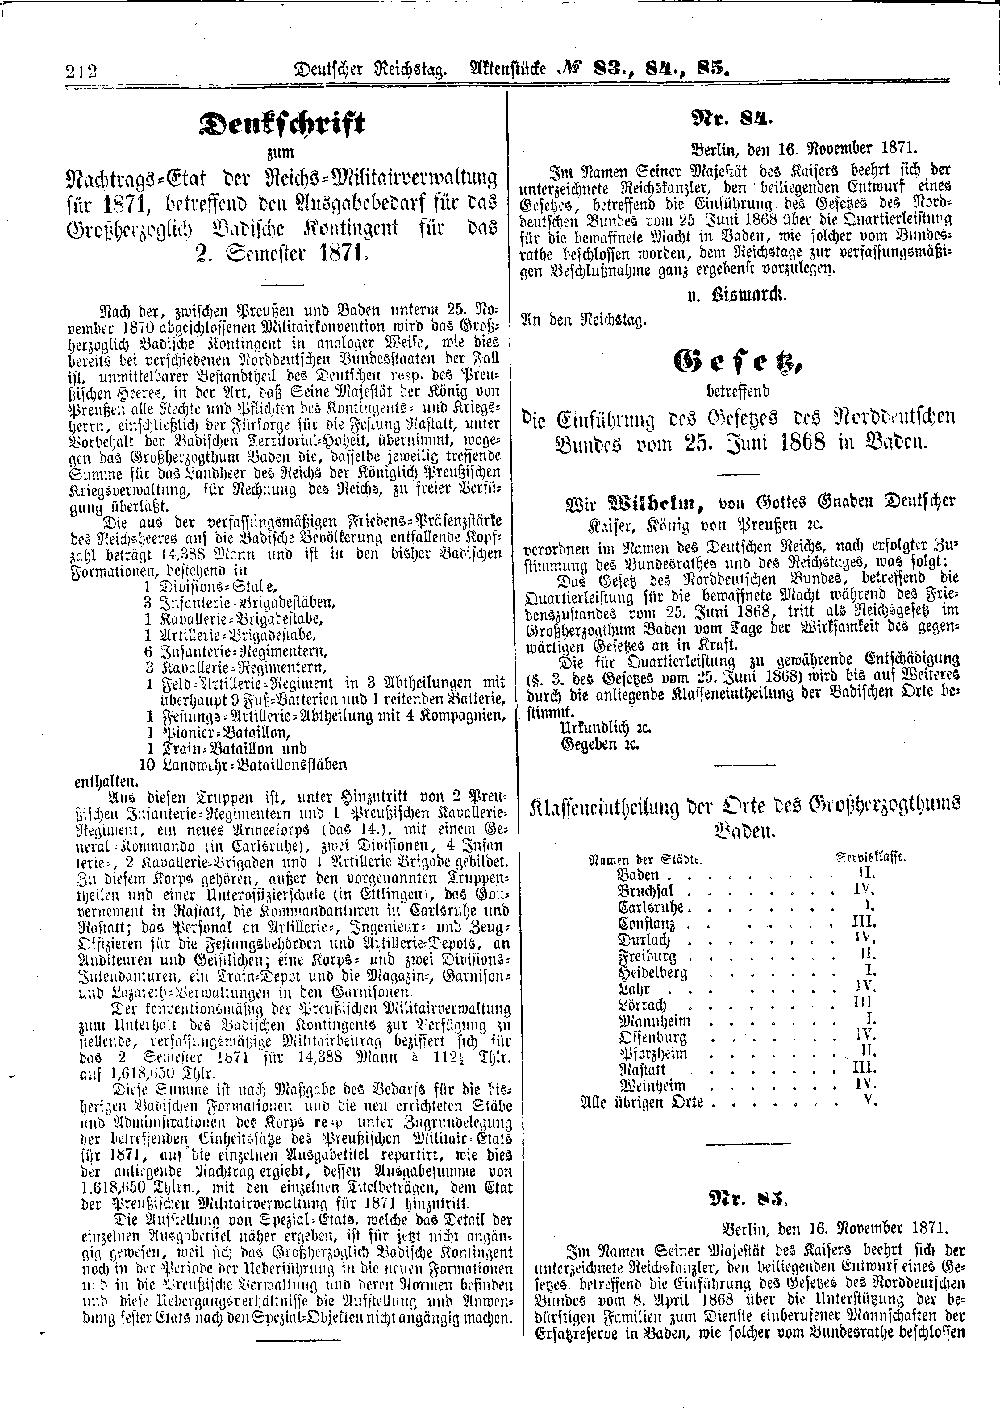 Scan of page 212